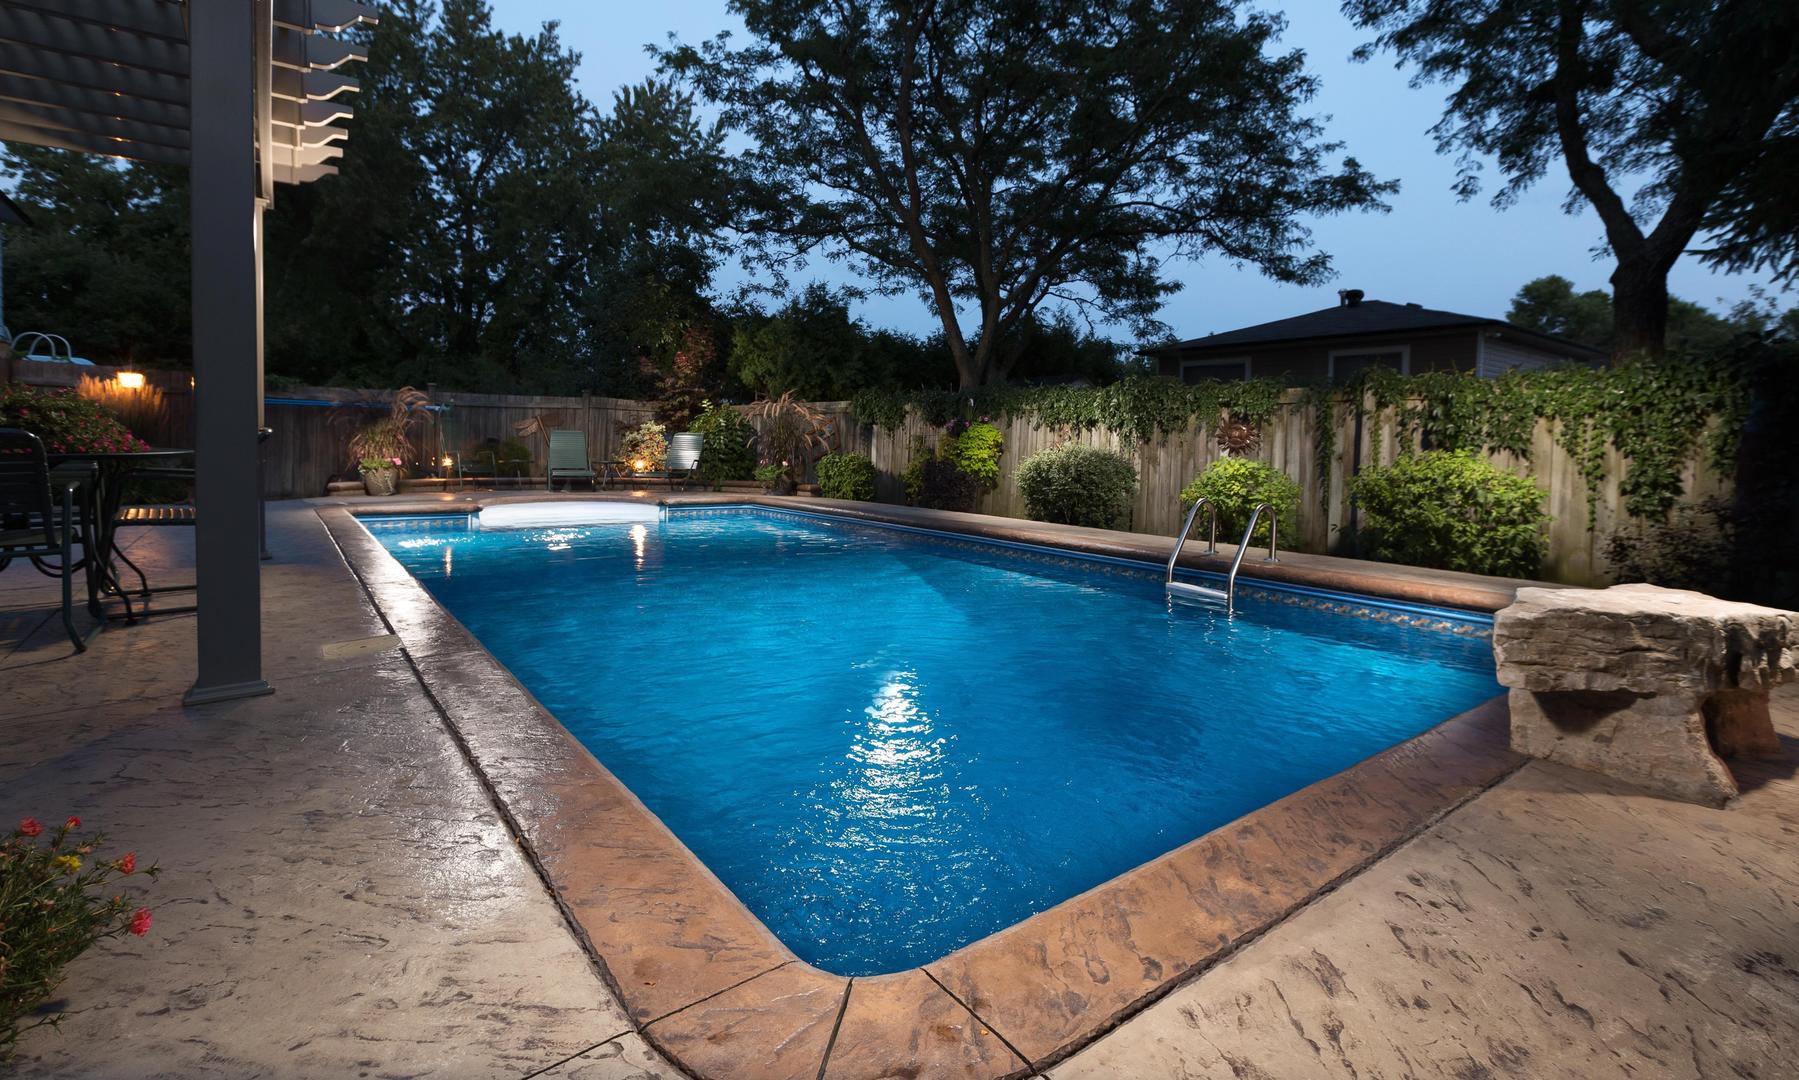  Transform Your Pool into an Aquatic Playground with a Diving Rock! 